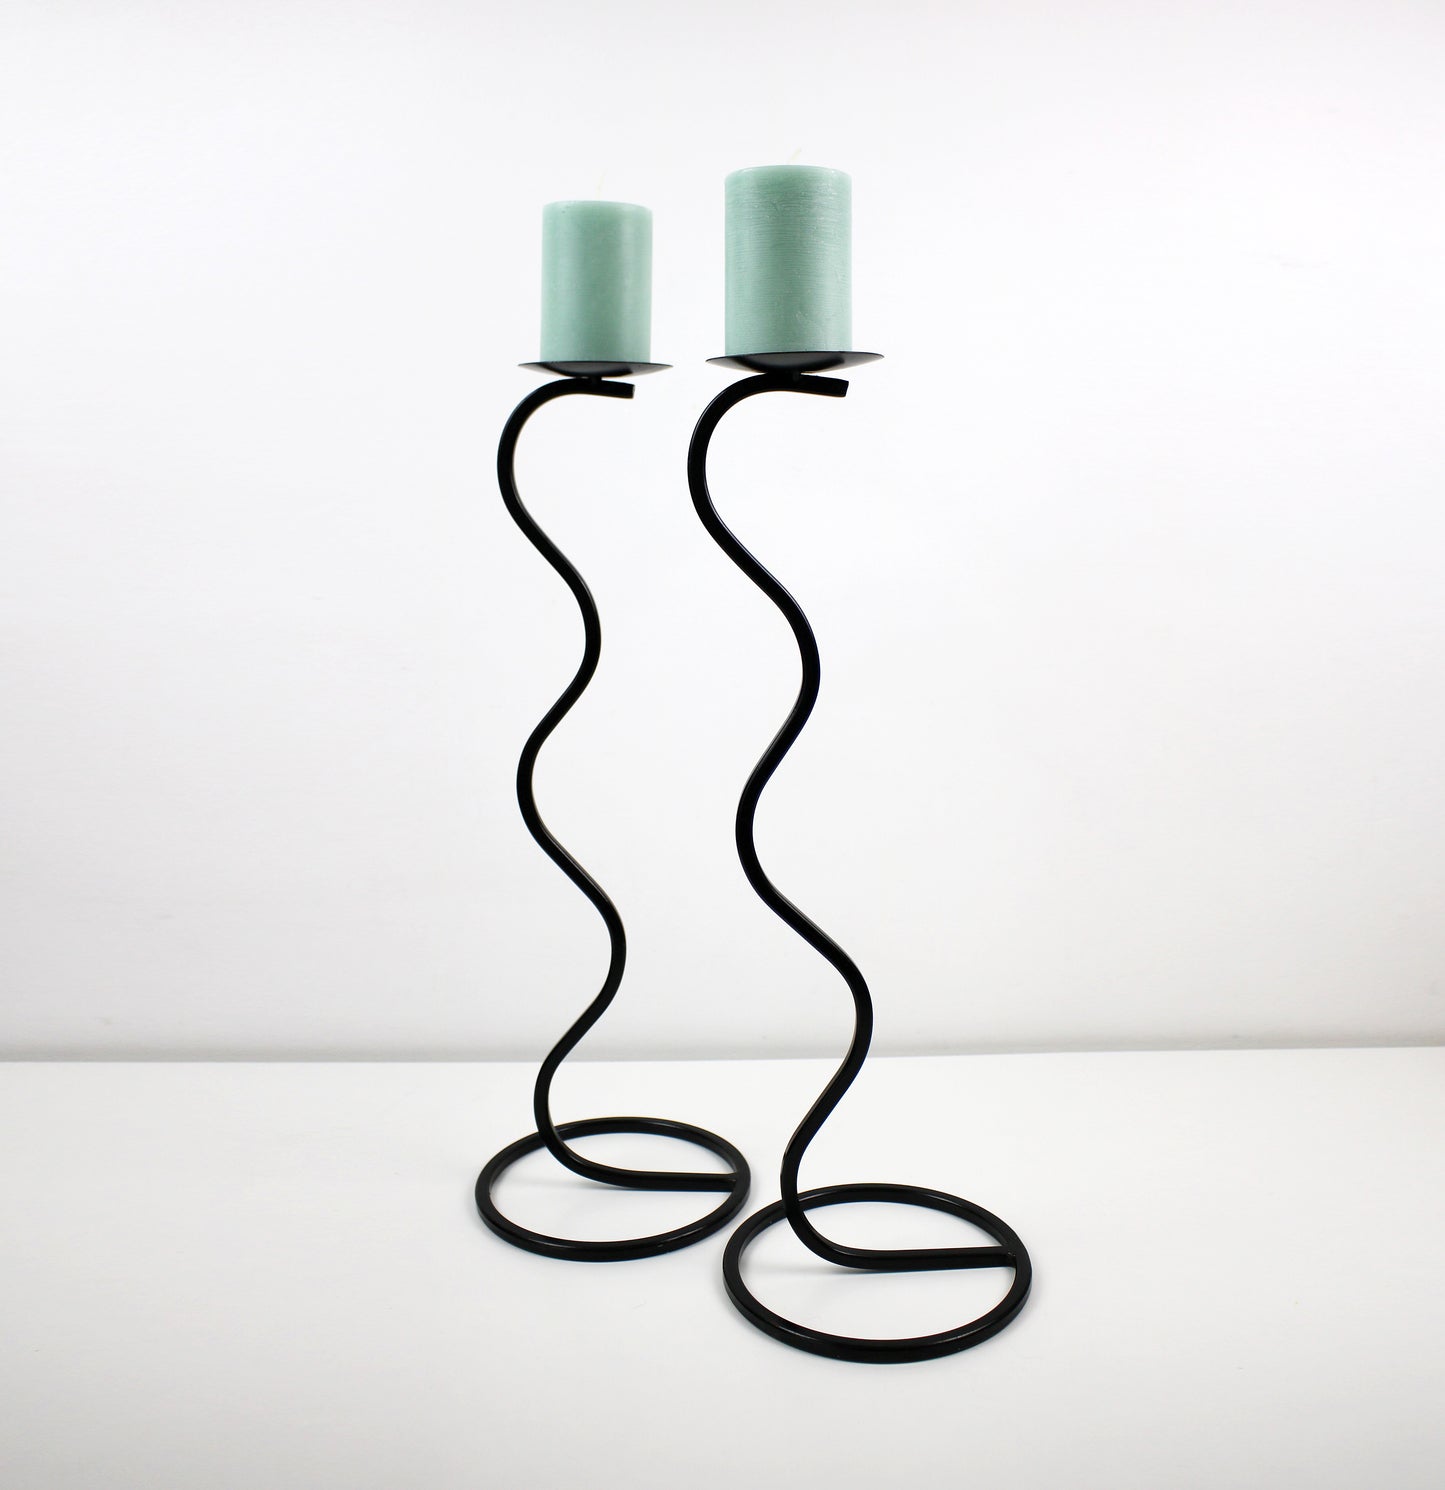 Pair of post modern floor standing wavy squiggle iron candlesticks candle holders